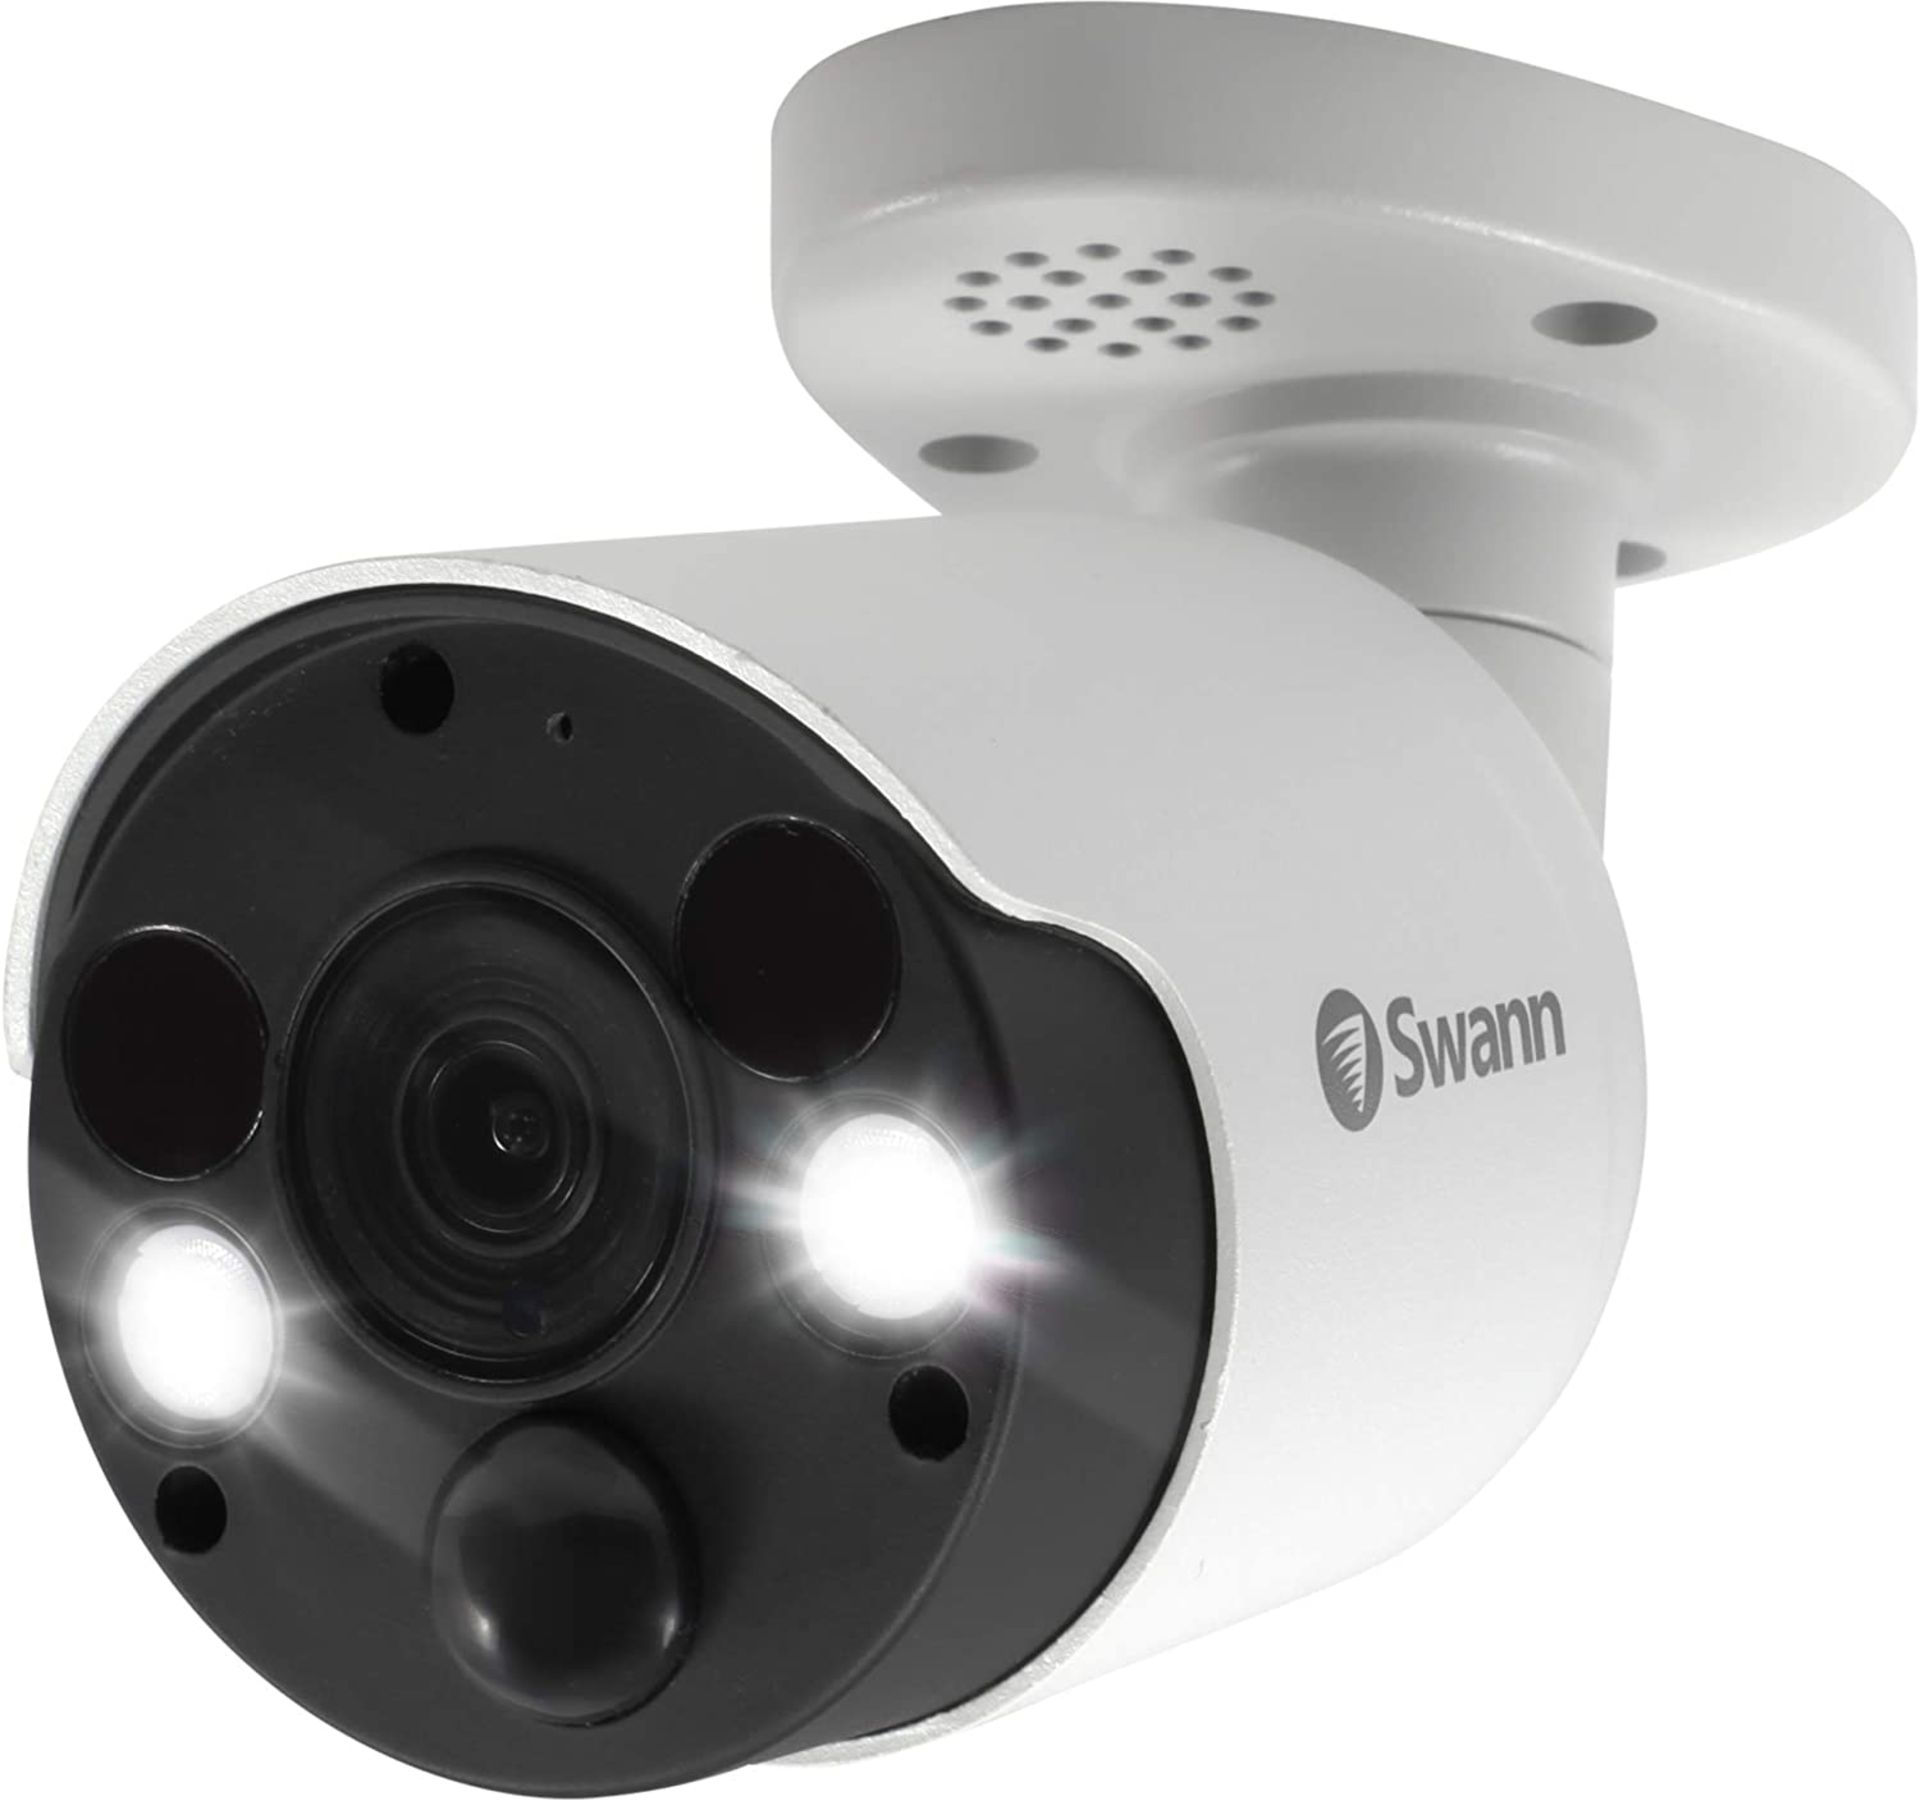 Swann CCTV 4K Thermal Sensing Bullet IP Security Camera with Face Recognition, Spotlights, and 2-Way